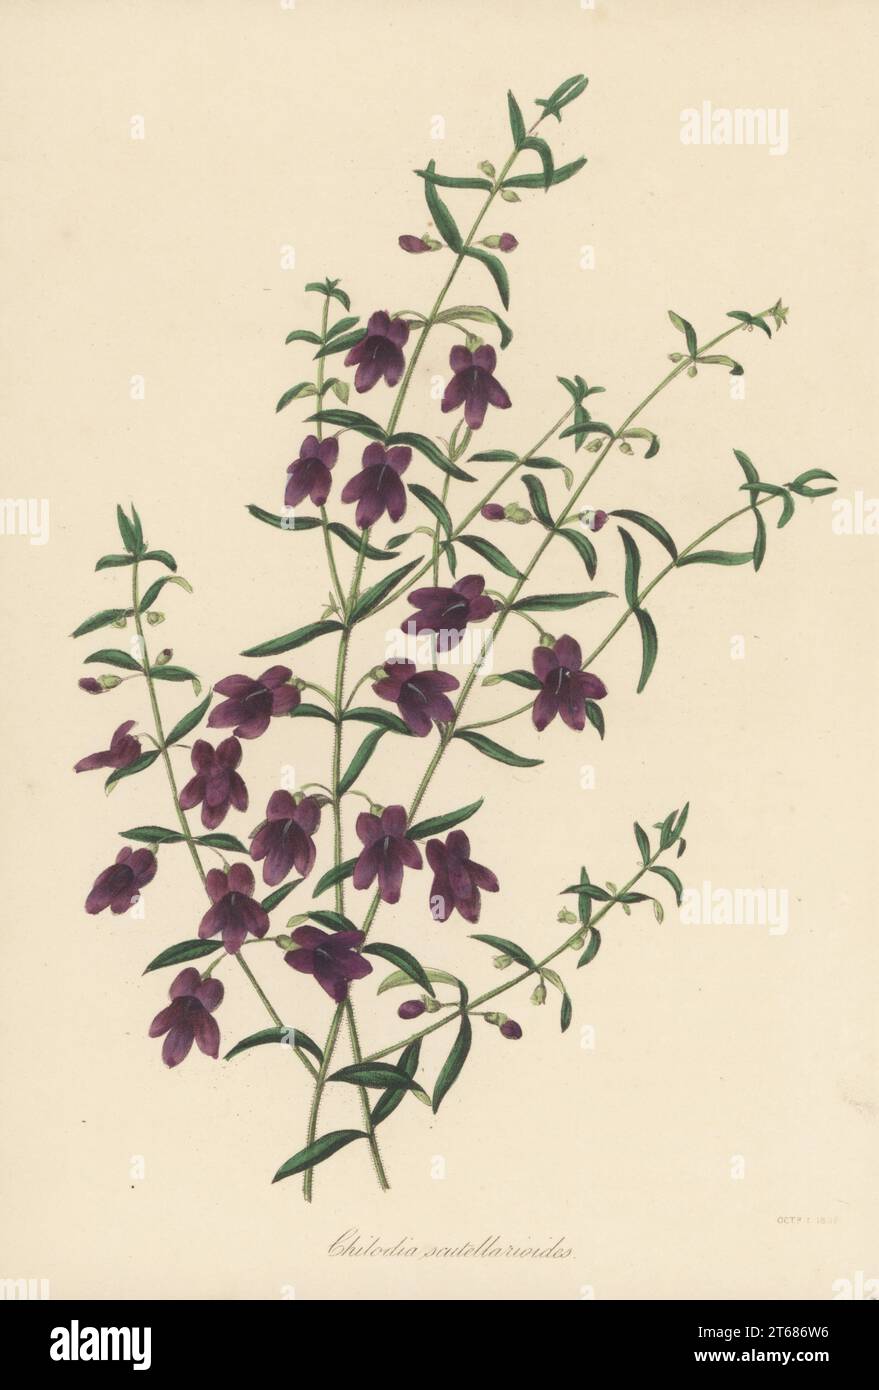 Mint bush, Prostanthera scutellarioides. Native to New South Wales, Australia, first described in 1810 by Scottish botanist Robert Brown. Scutellaria-like chilodia, Chilodia scutellarioides. Handcoloured lithograph from Joseph Paxtons Magazine of Botany, and Register of Flowering Plants, Volume 5, Orr and Smith, London, 1838. Stock Photo